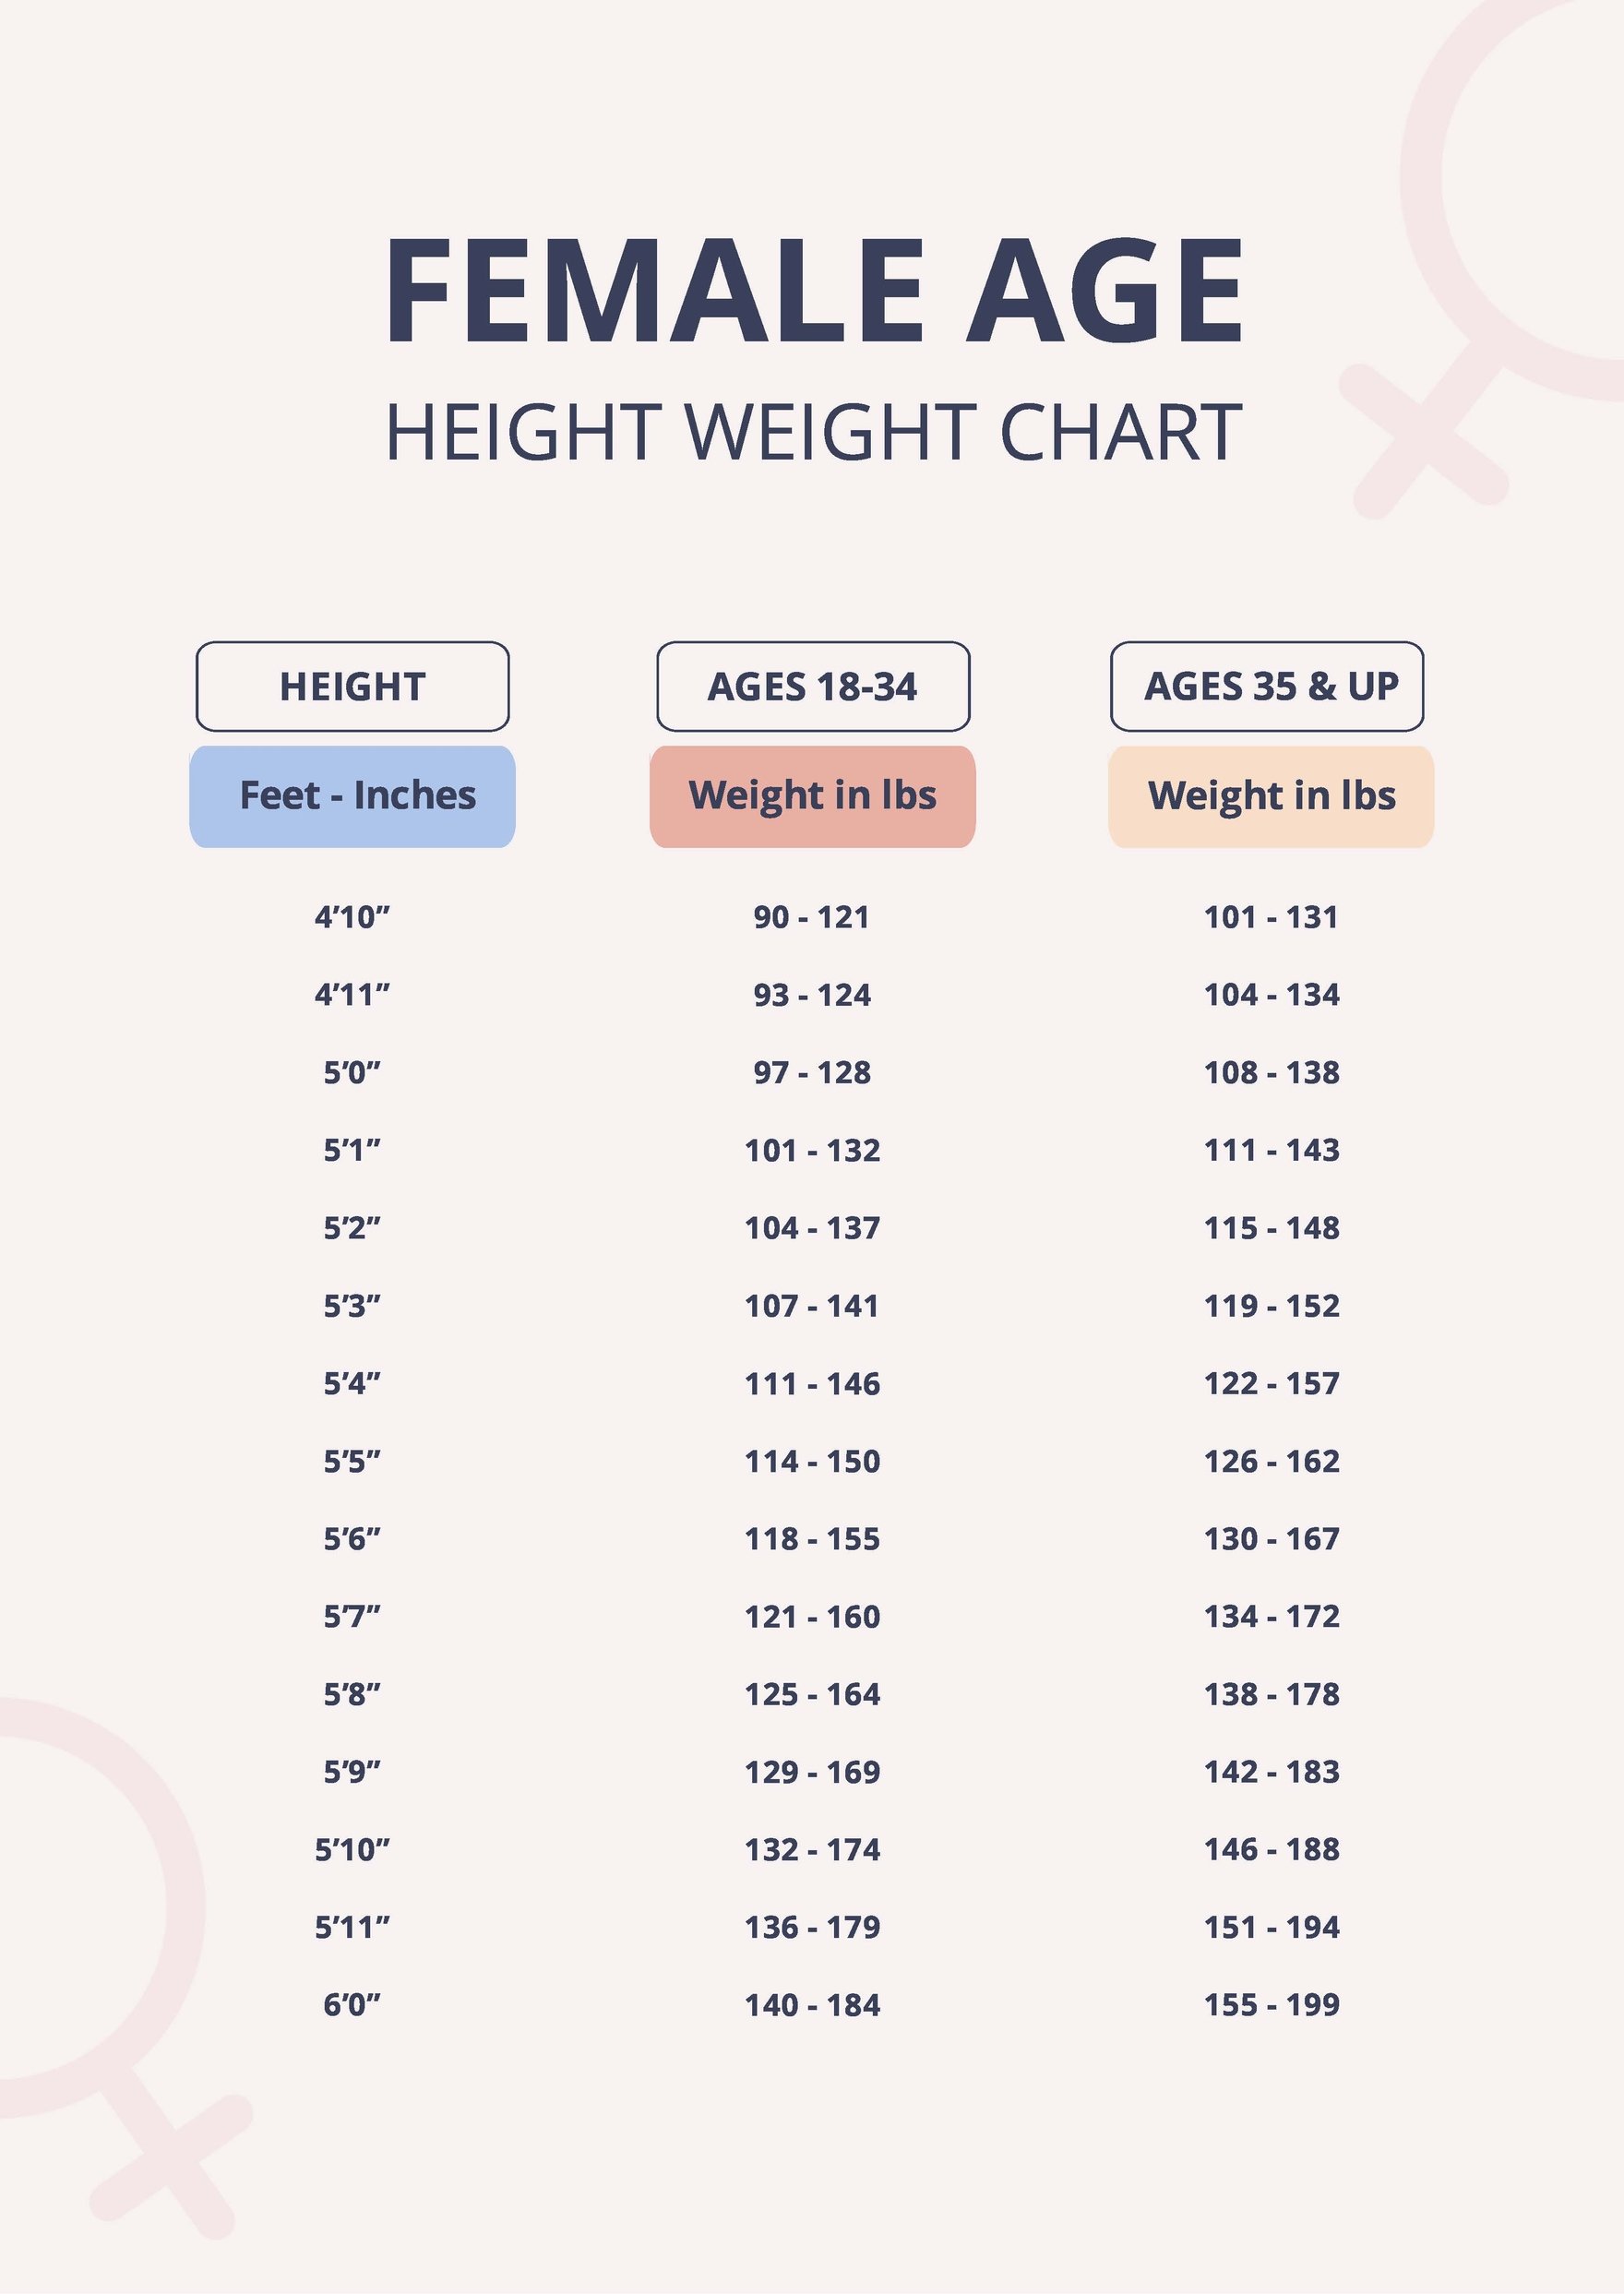 Female Age Height Weight Chart